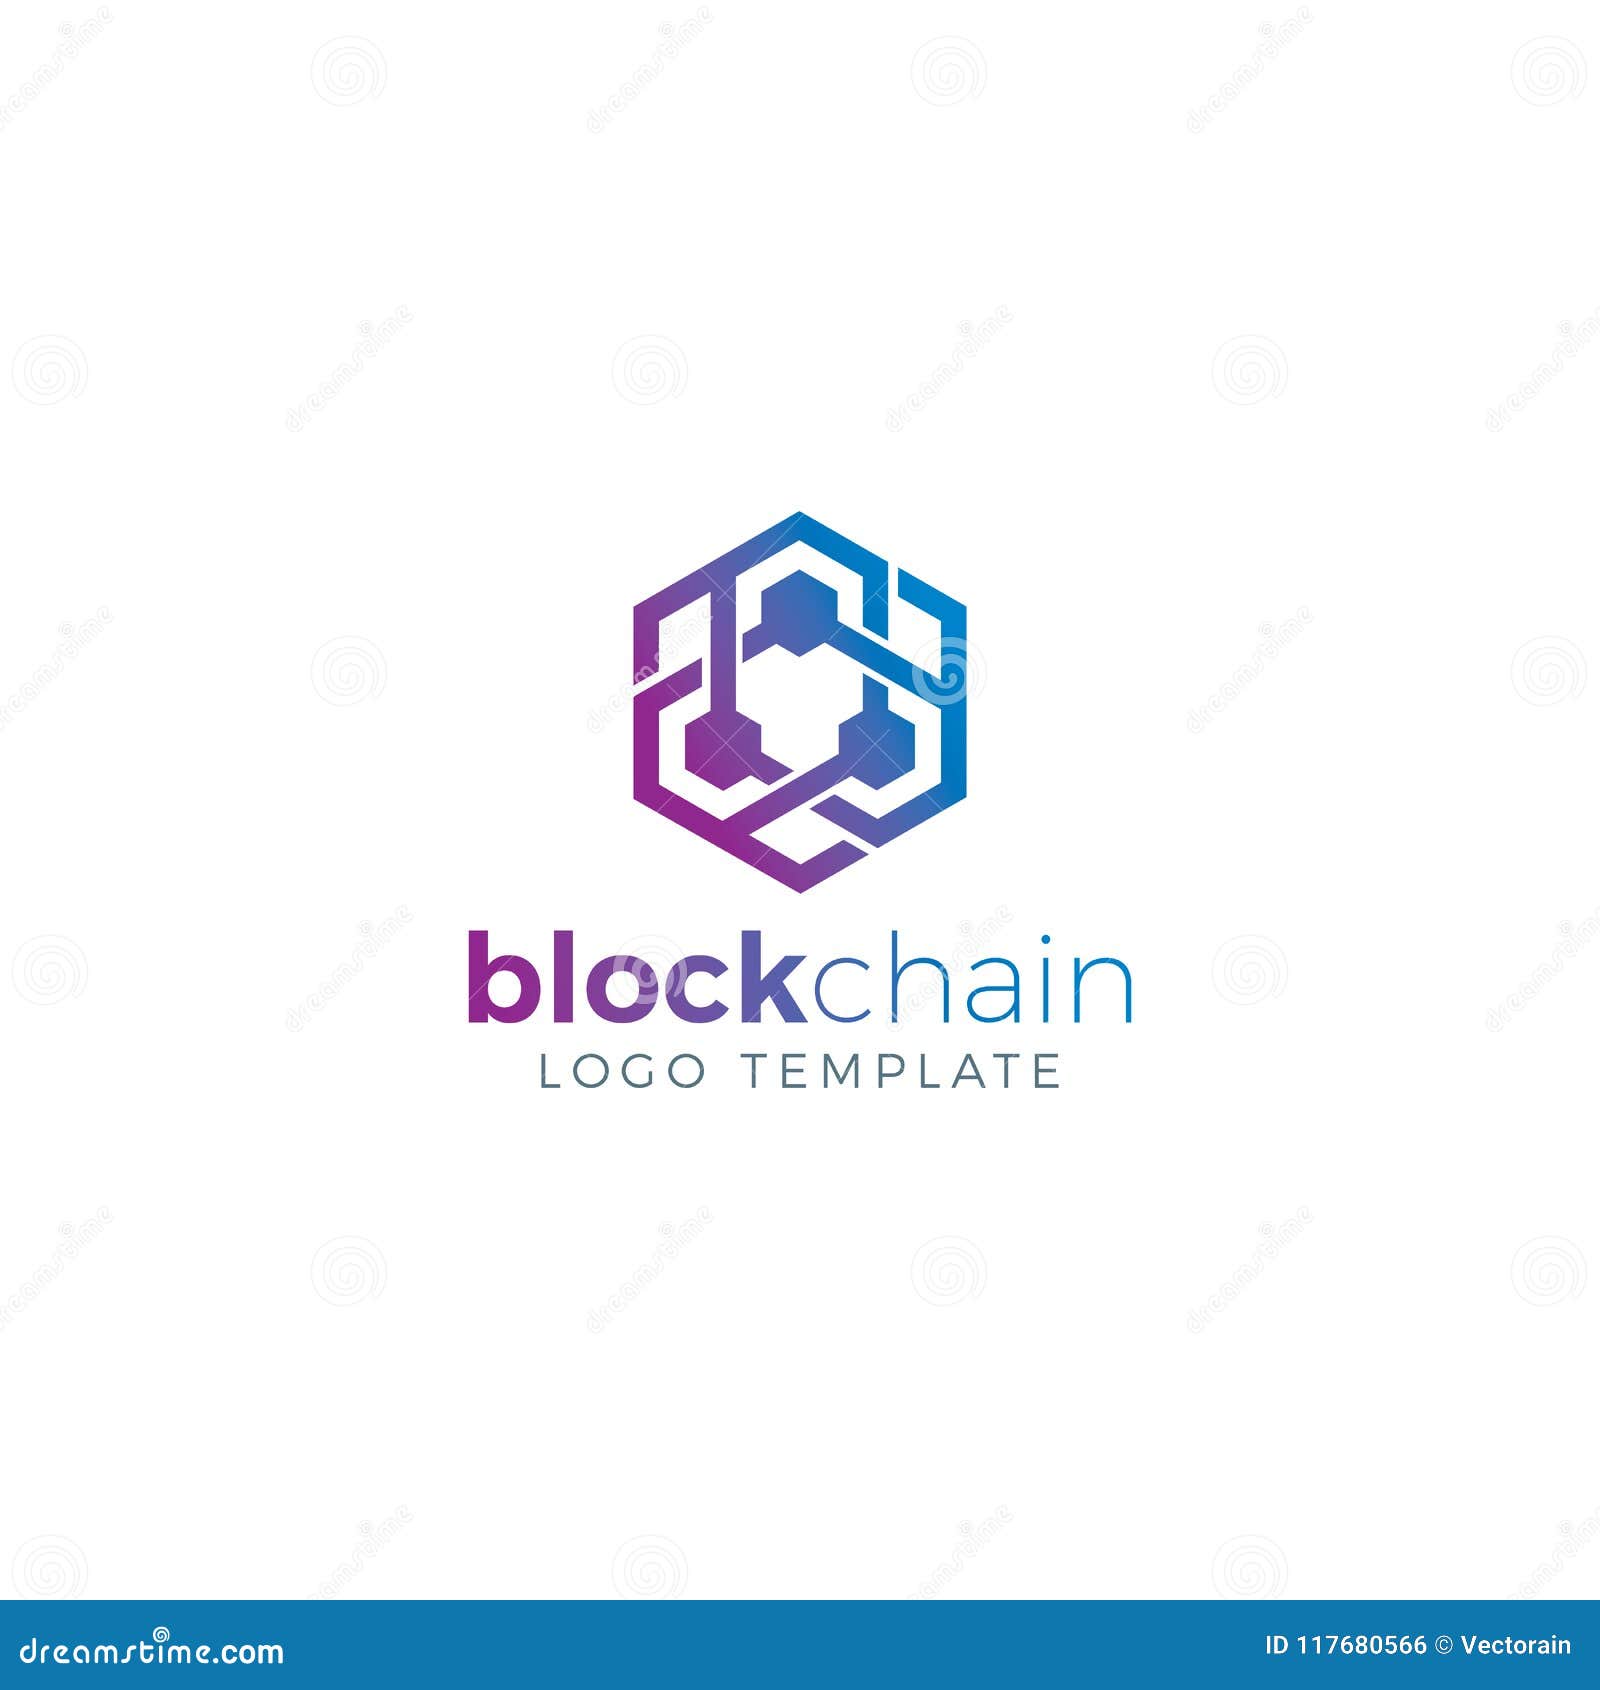 blockchain and cryptocurrency logo concept